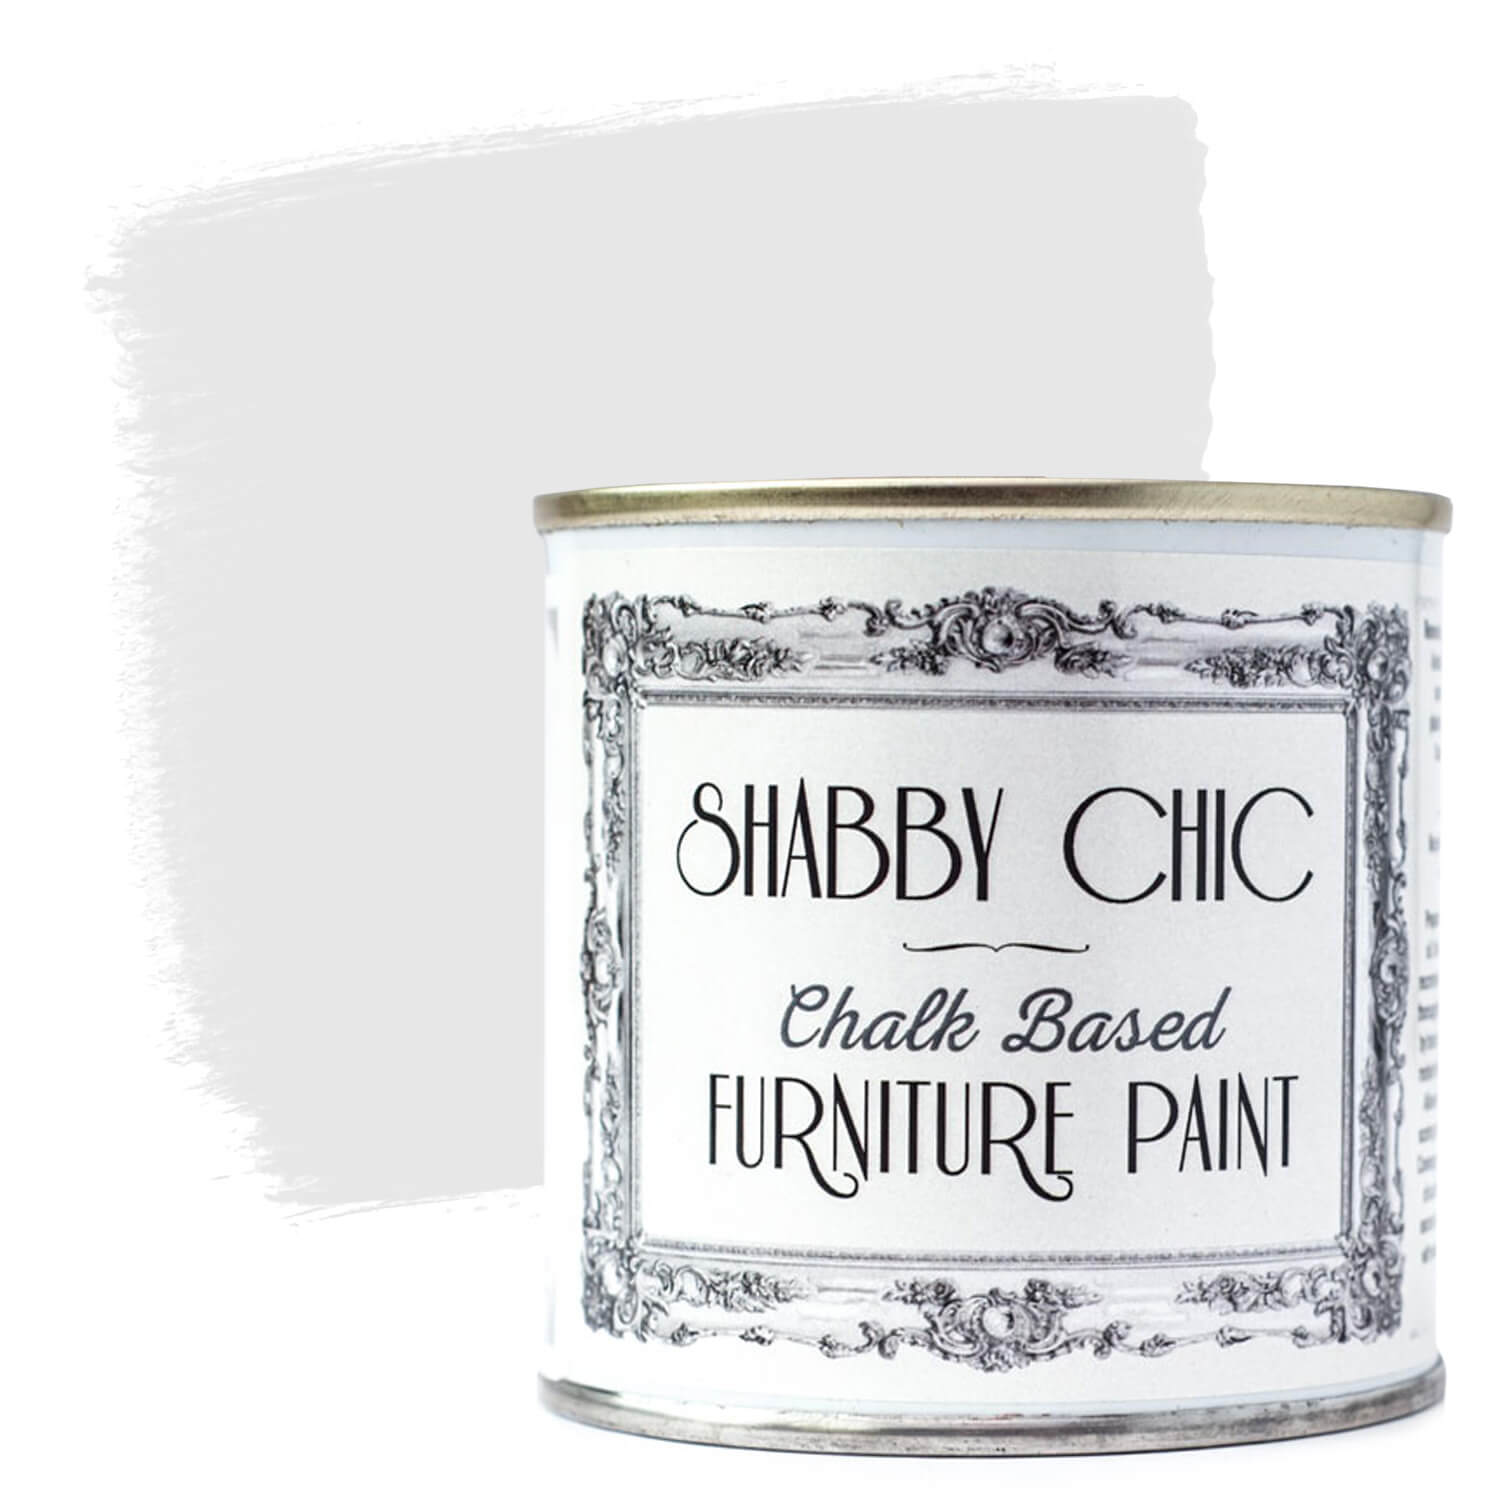 Shabby Chic Furniture Paint in Winter White